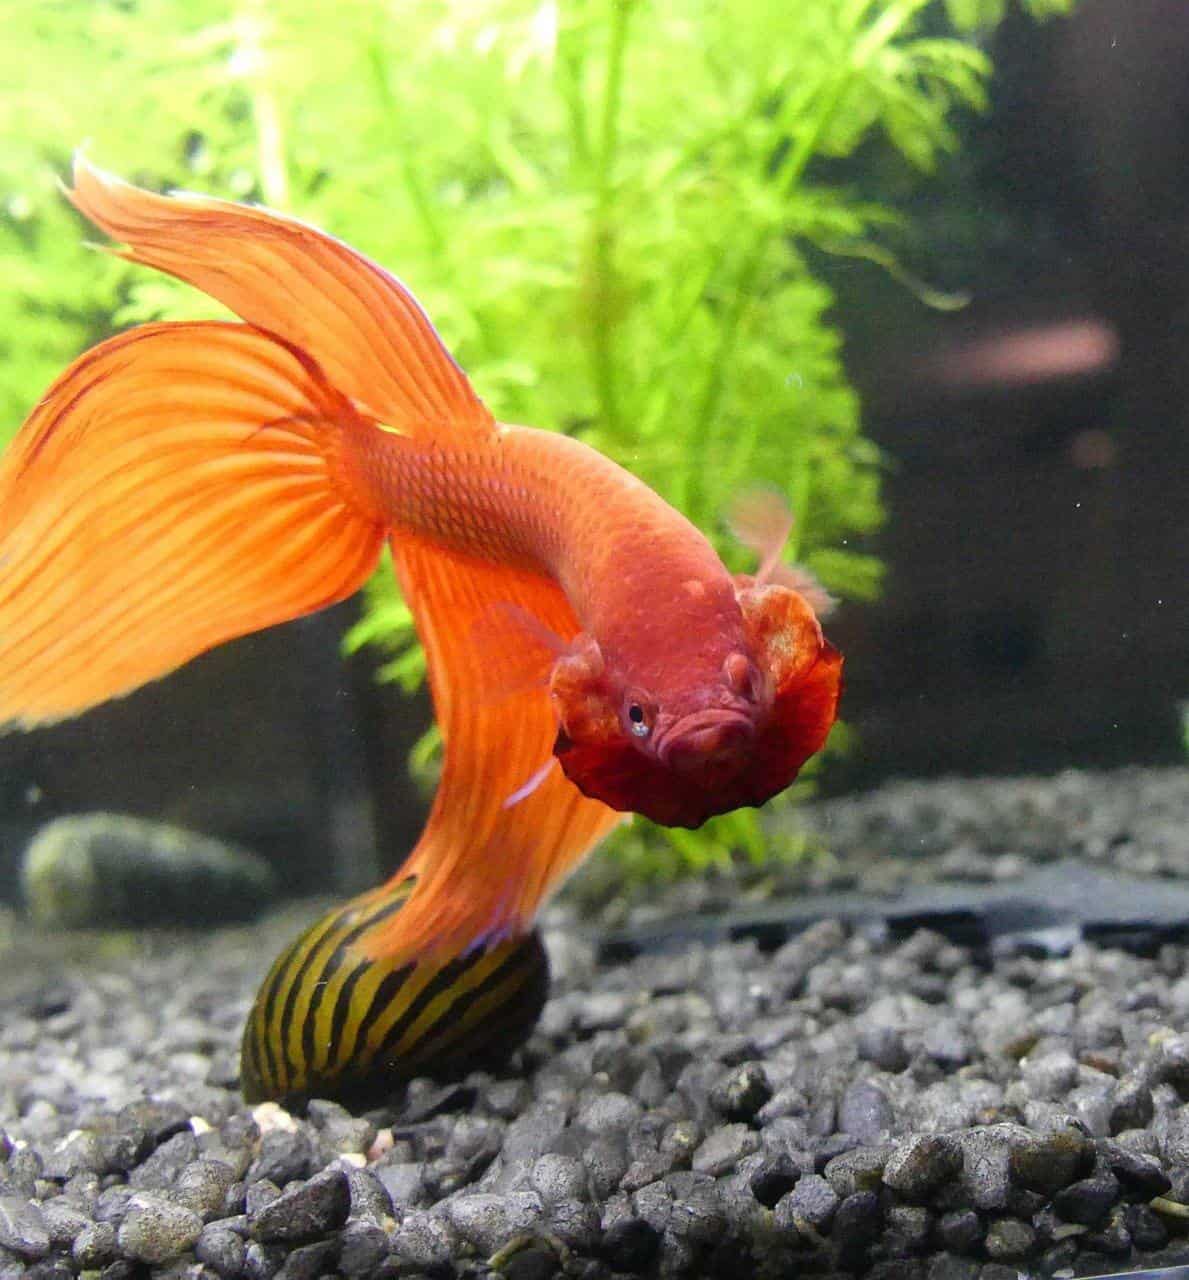 Betta Fish Gills Flared: Causes and Solutions 2